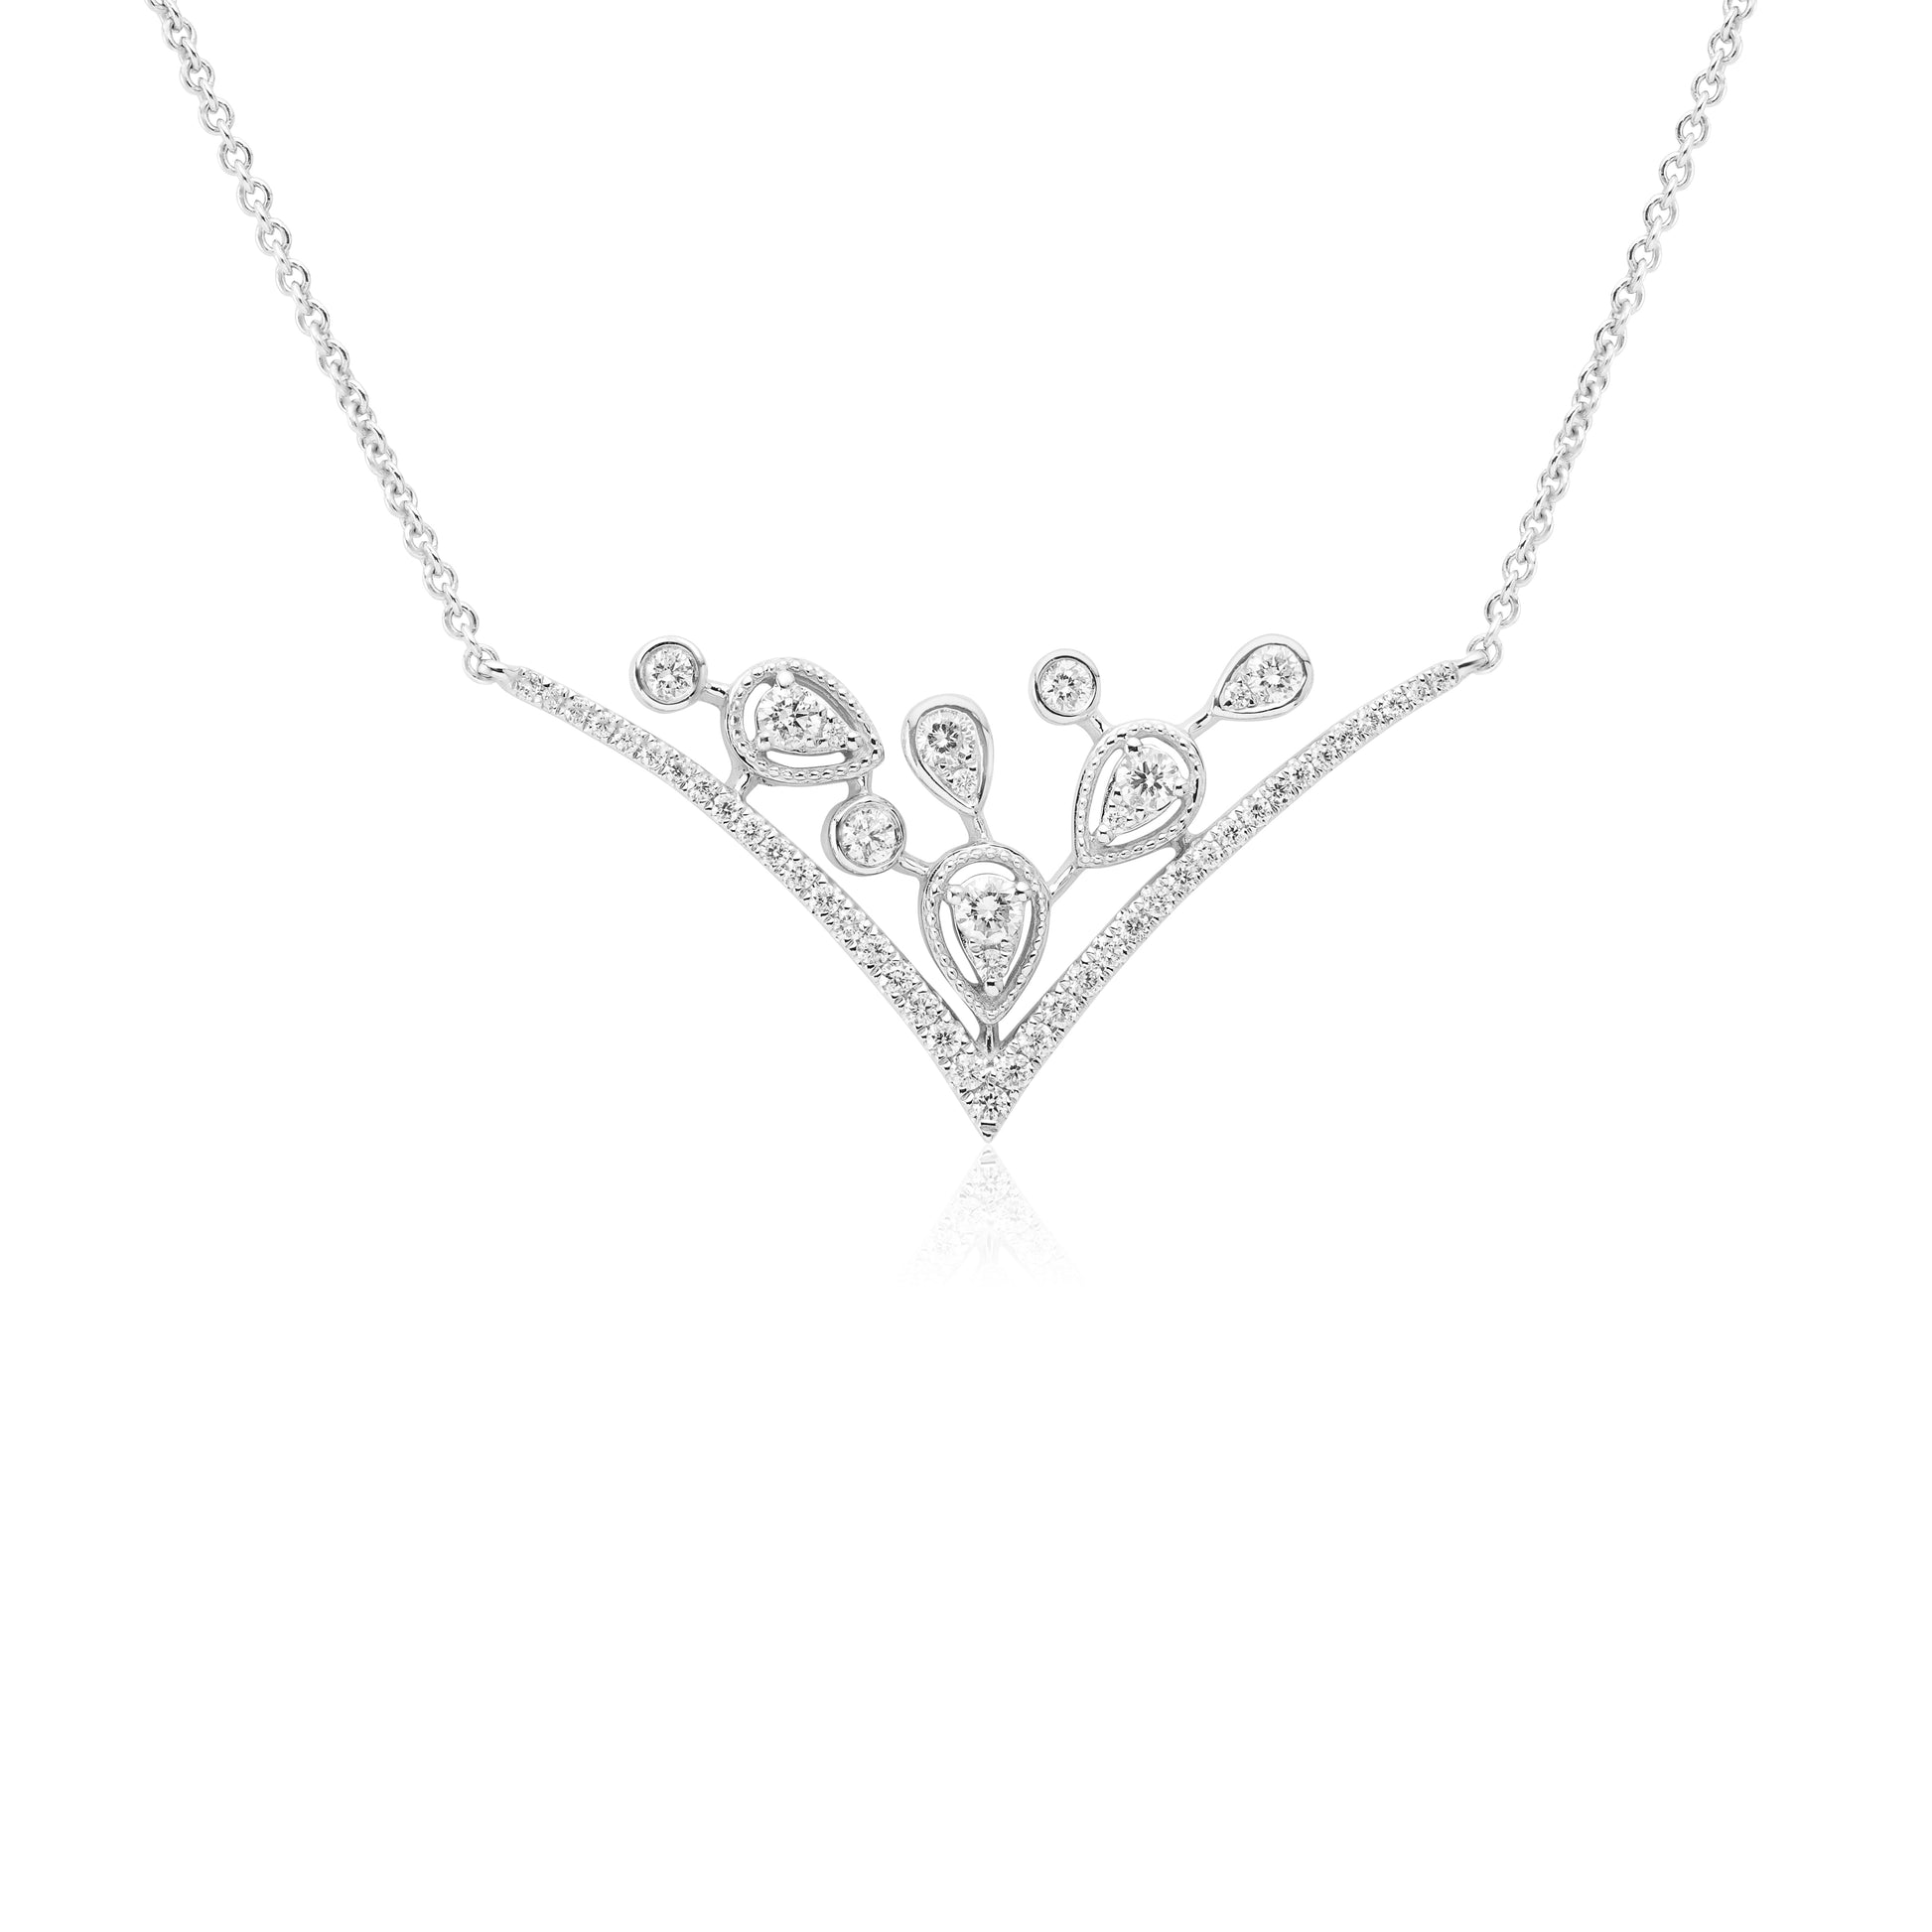 White Gold Necklaces White Gold V Shape Diamond Necklace With Pear Shape Accents dansonjewelers Danson Jewelers 